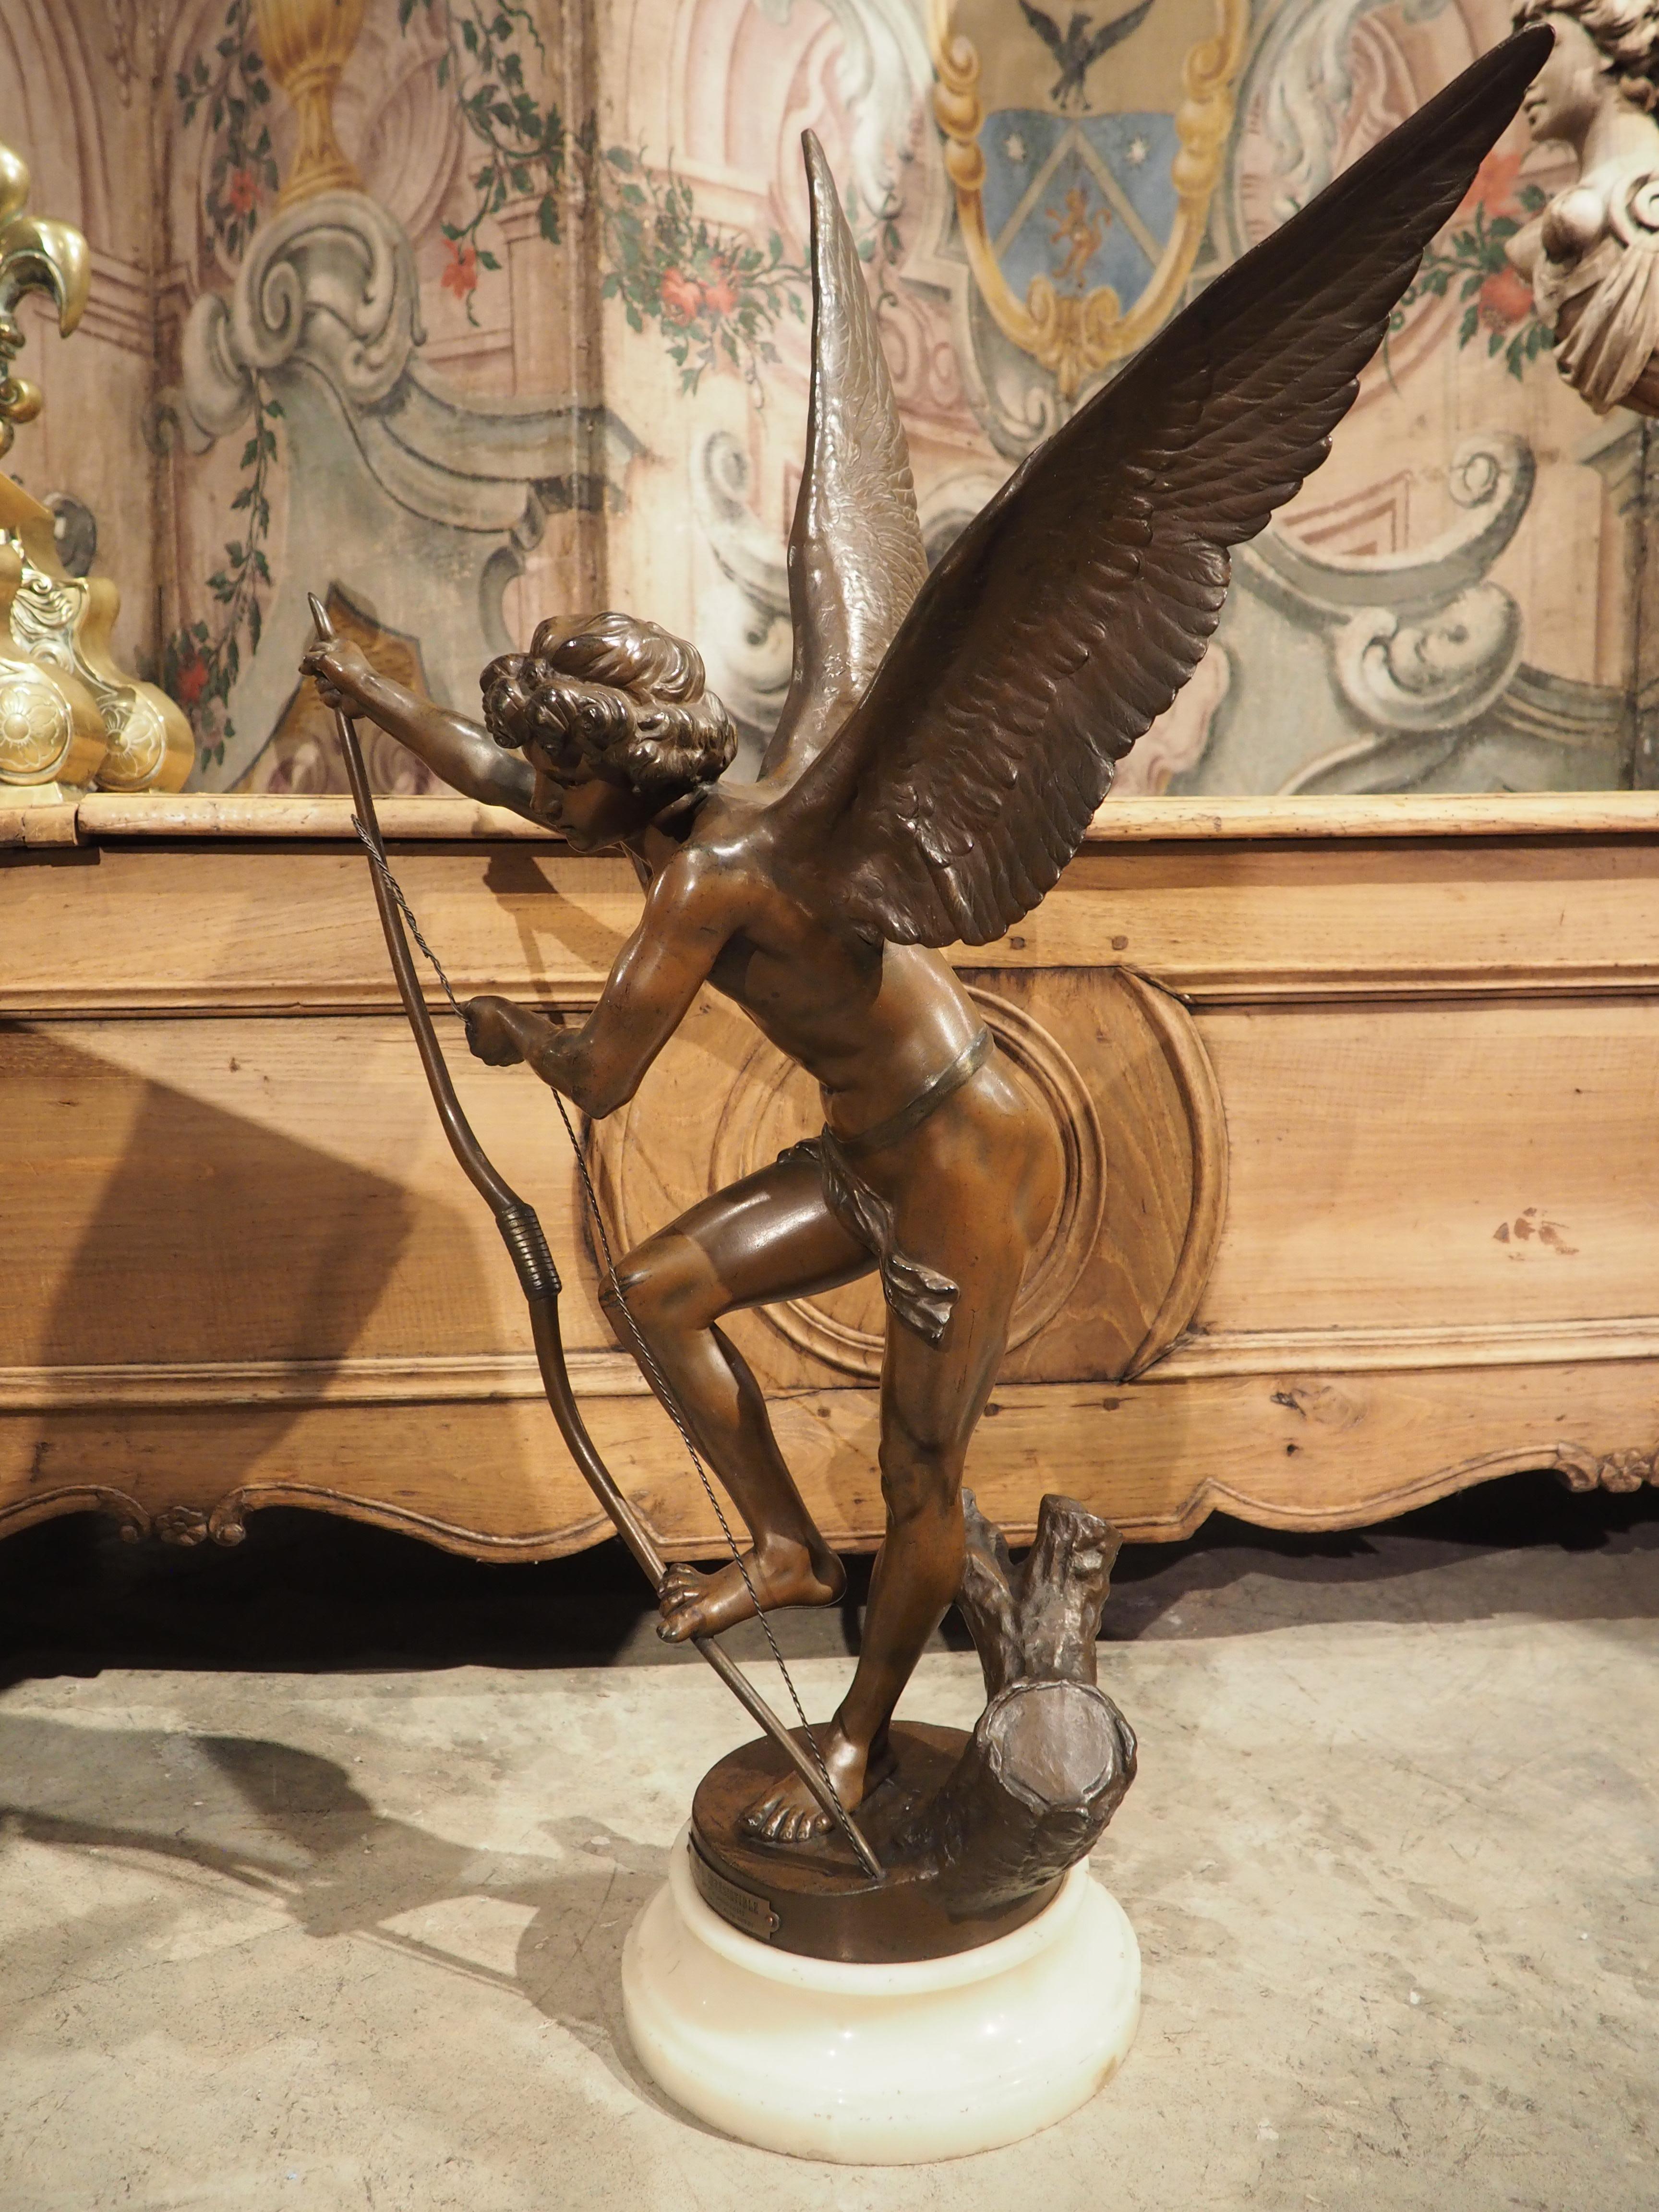 After the original sculpture by Maria Cassavetti, this metal statue on an alabaster base depicts Cupid stringing his bow. A small stump can be seen behind Cupid’s left foot, as he uses his right foot and right hand to bend the bow while he holds the